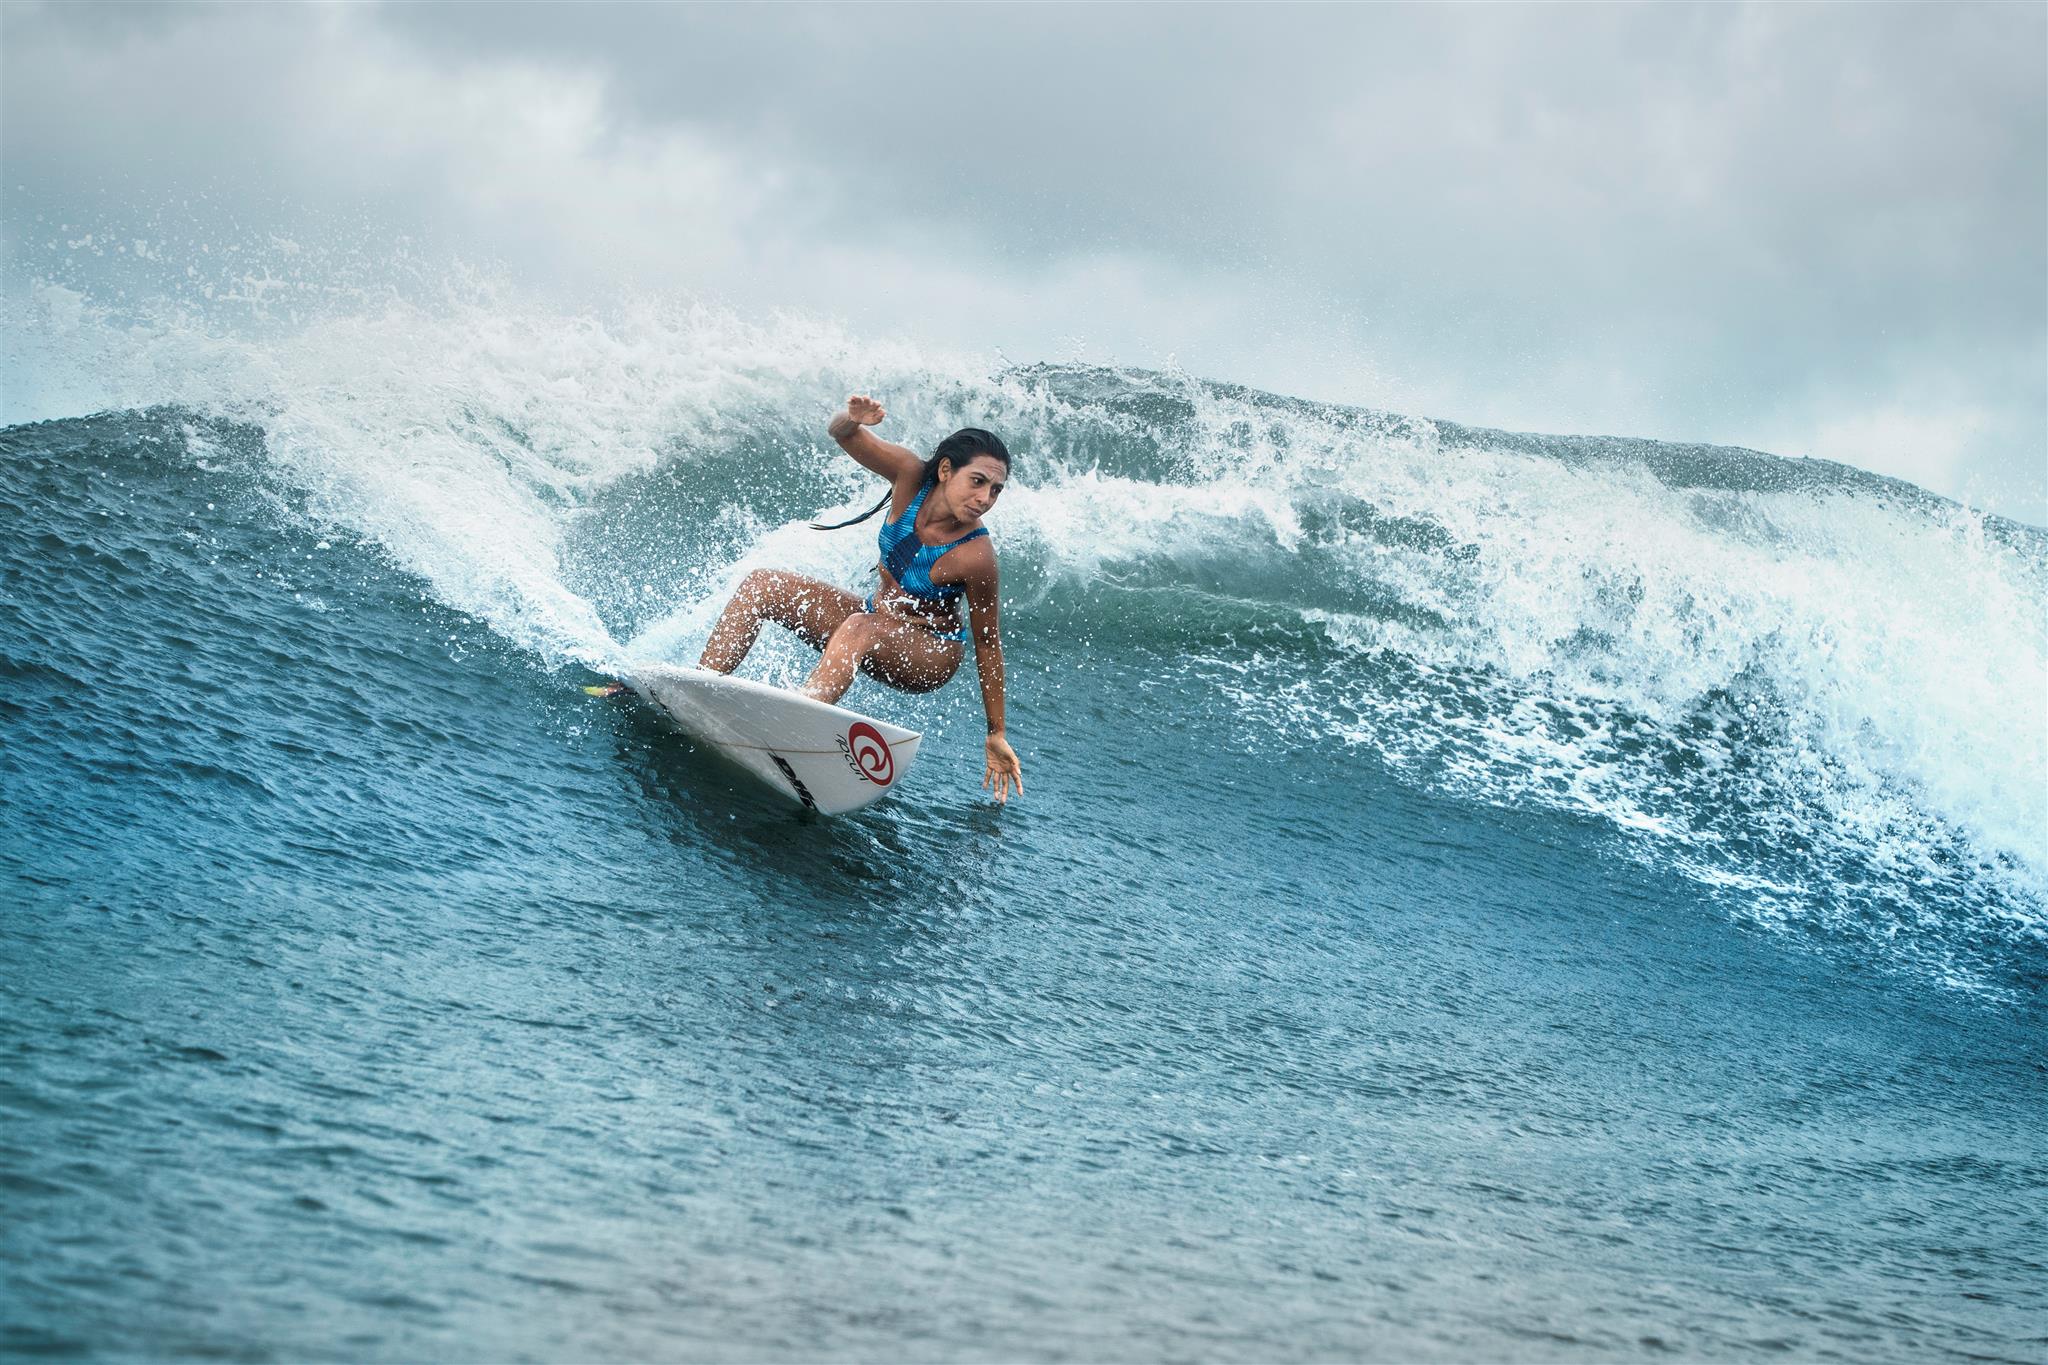 BALI'S PIONEERING GIRL SURFER, DIAH RAHAYU, RE-SIGNS WITH RIP CURL